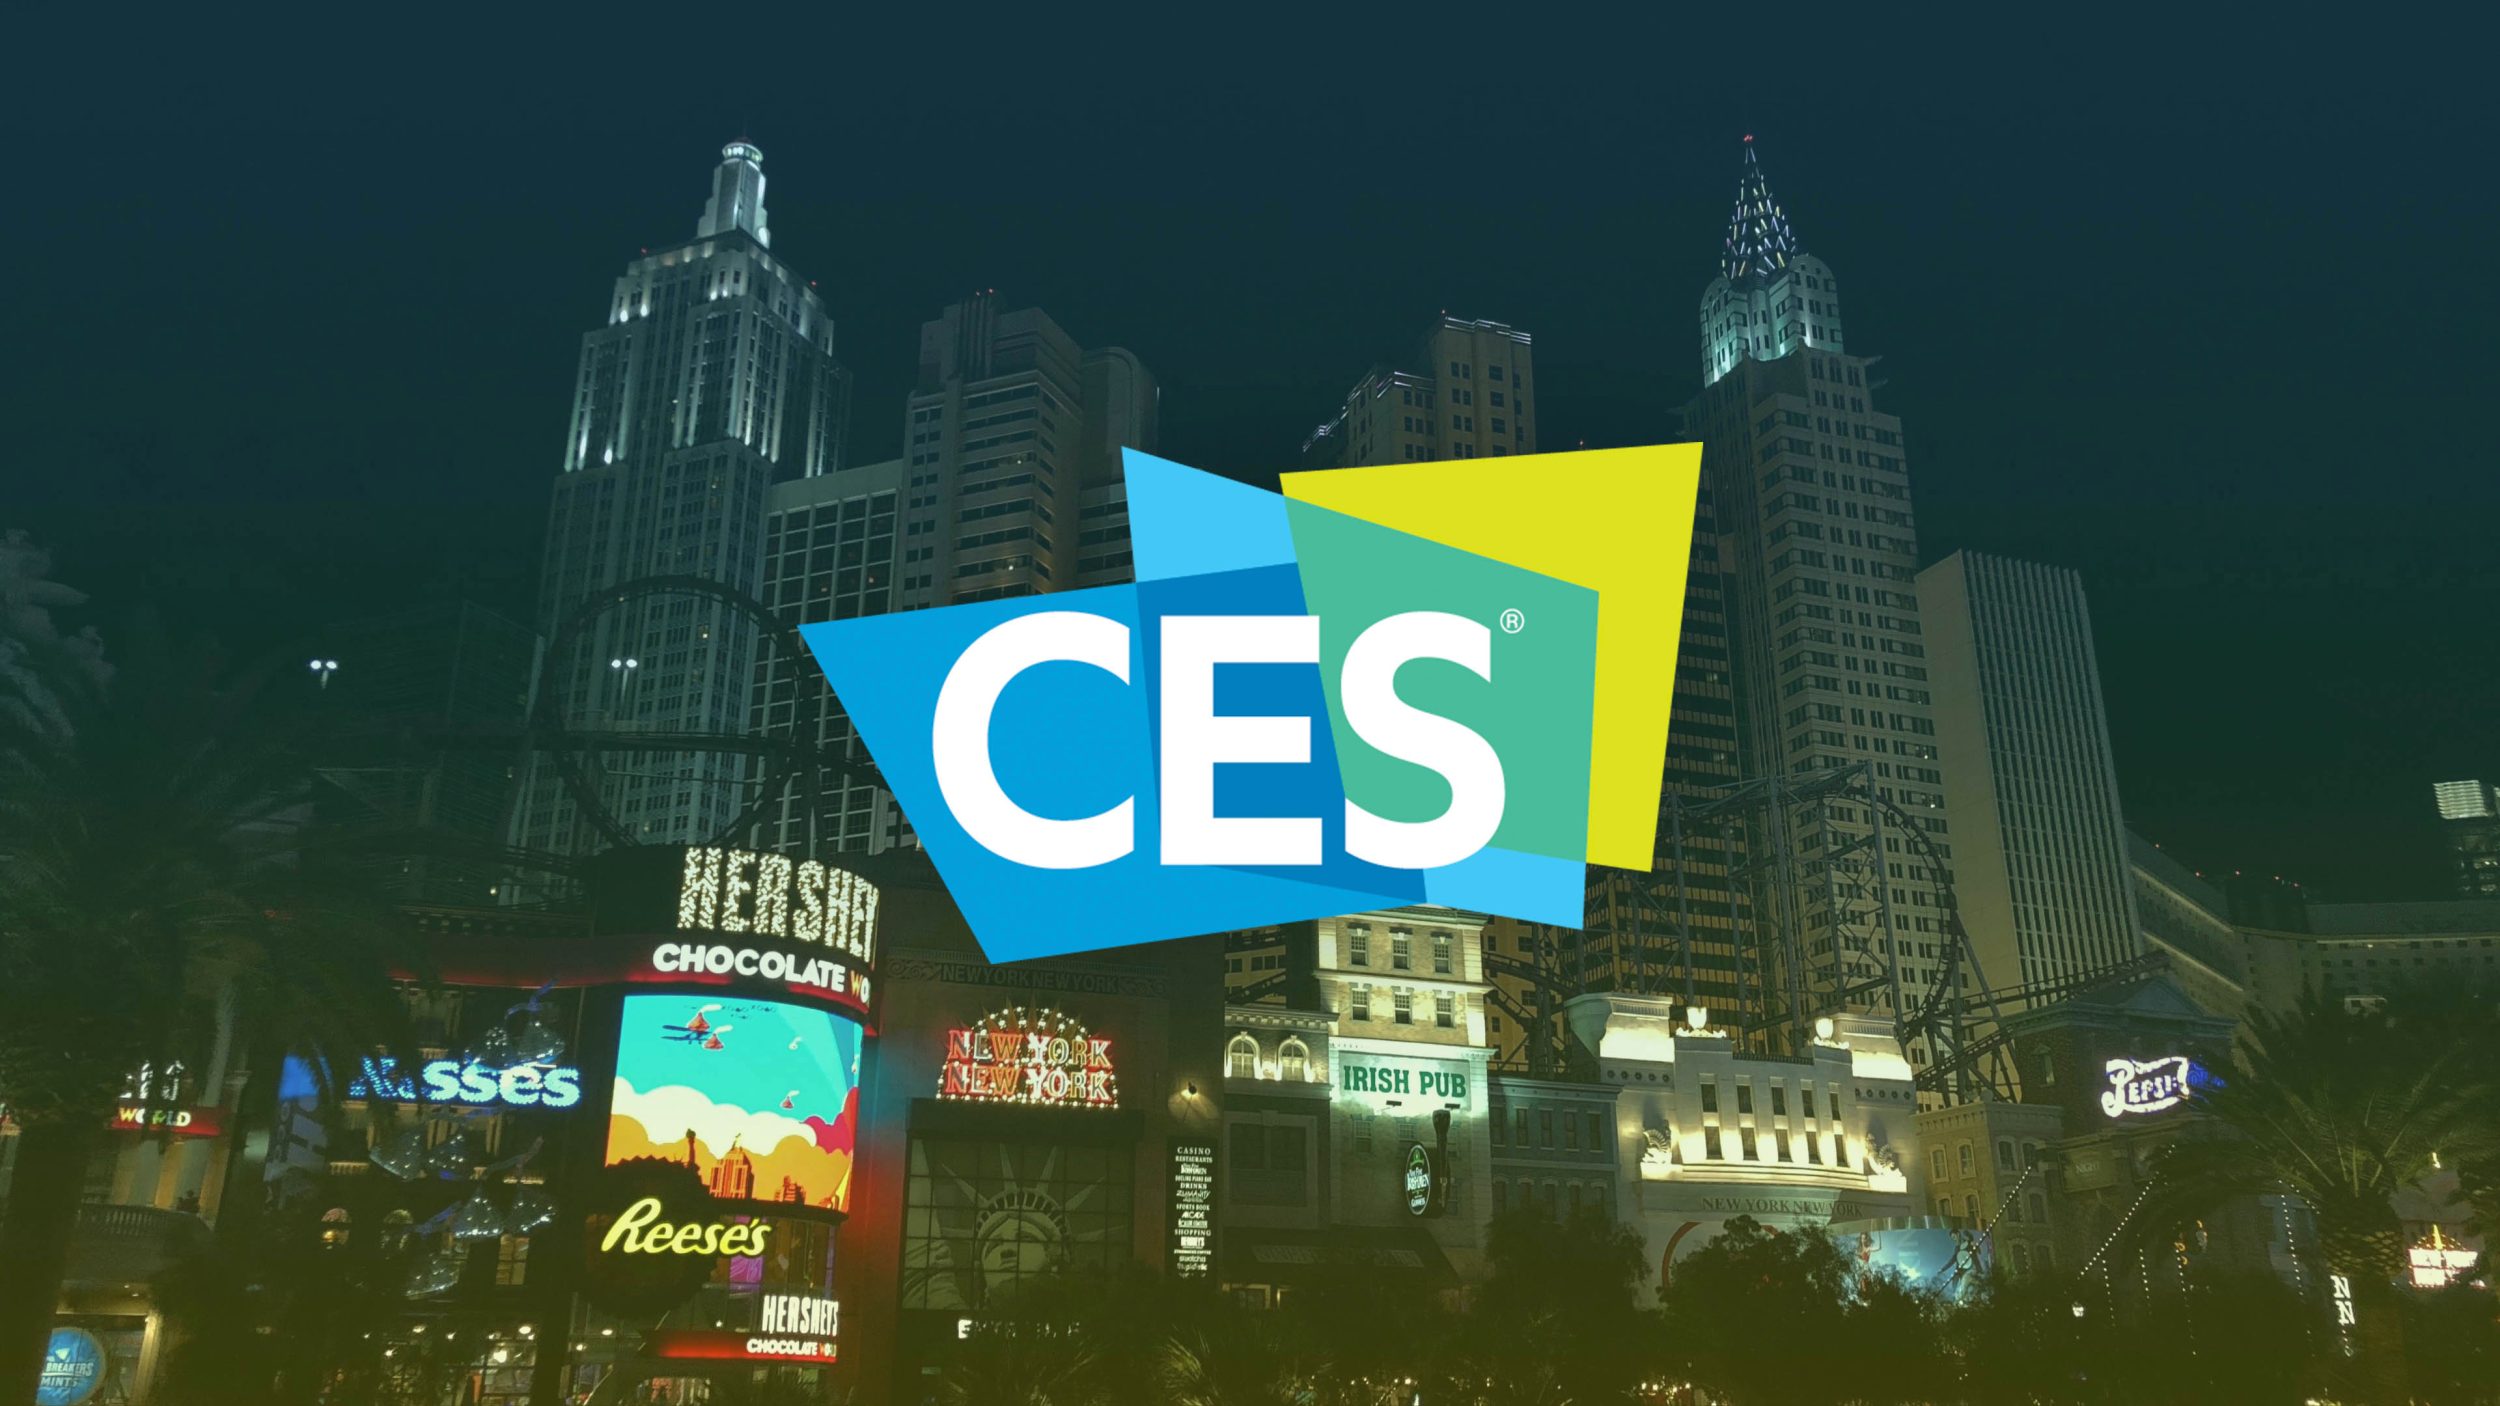 What to expect at CES 2018: HomeKit, wireless charging, HomePod, and more